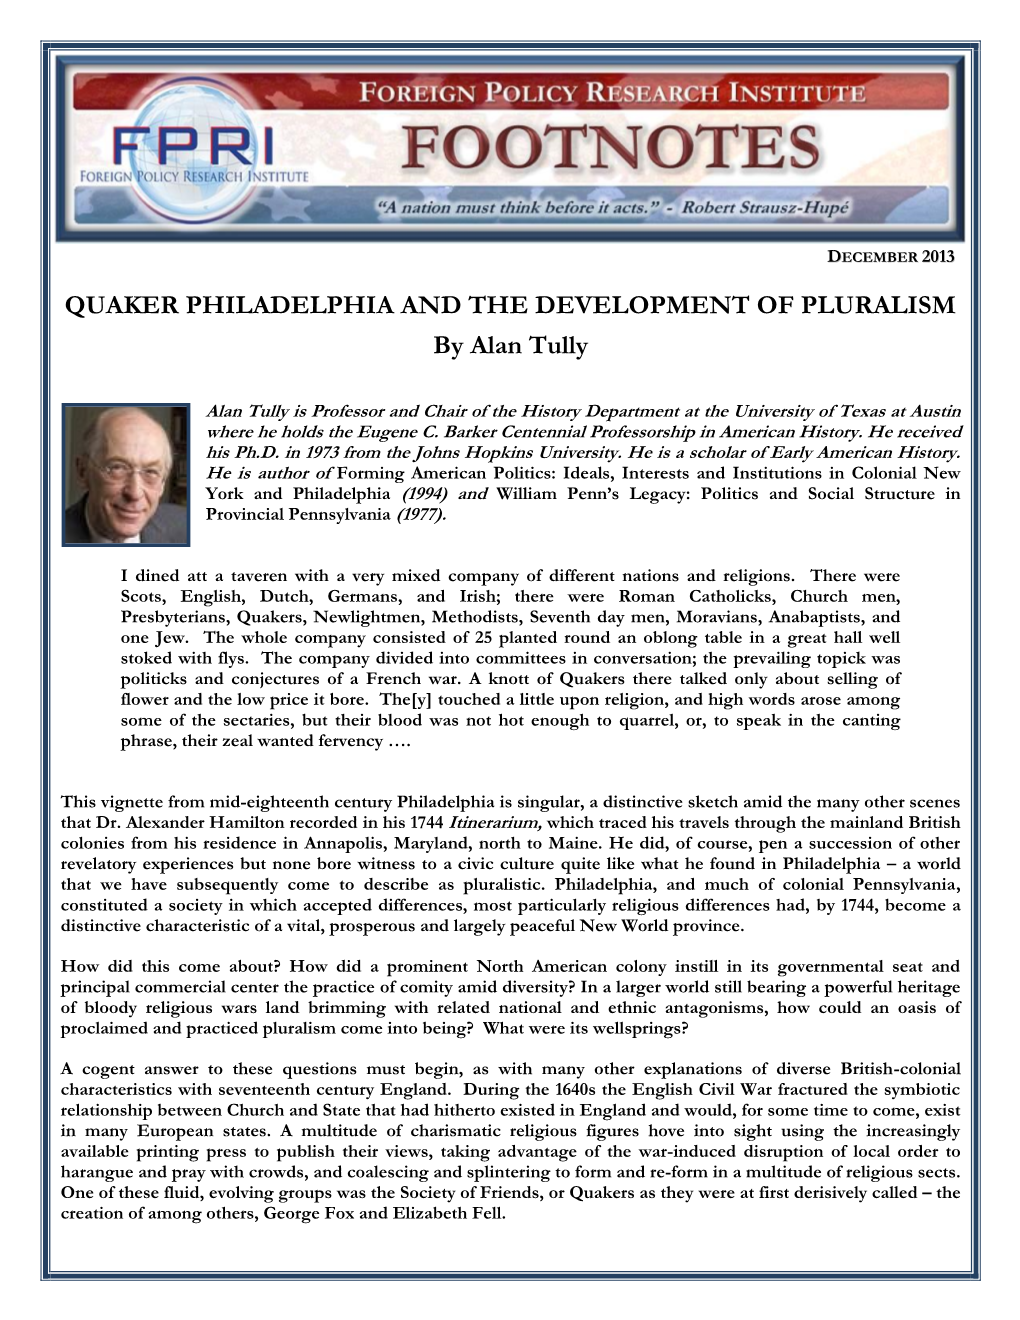 QUAKER PHILADELPHIA and the DEVELOPMENT of PLURALISM by Alan Tully